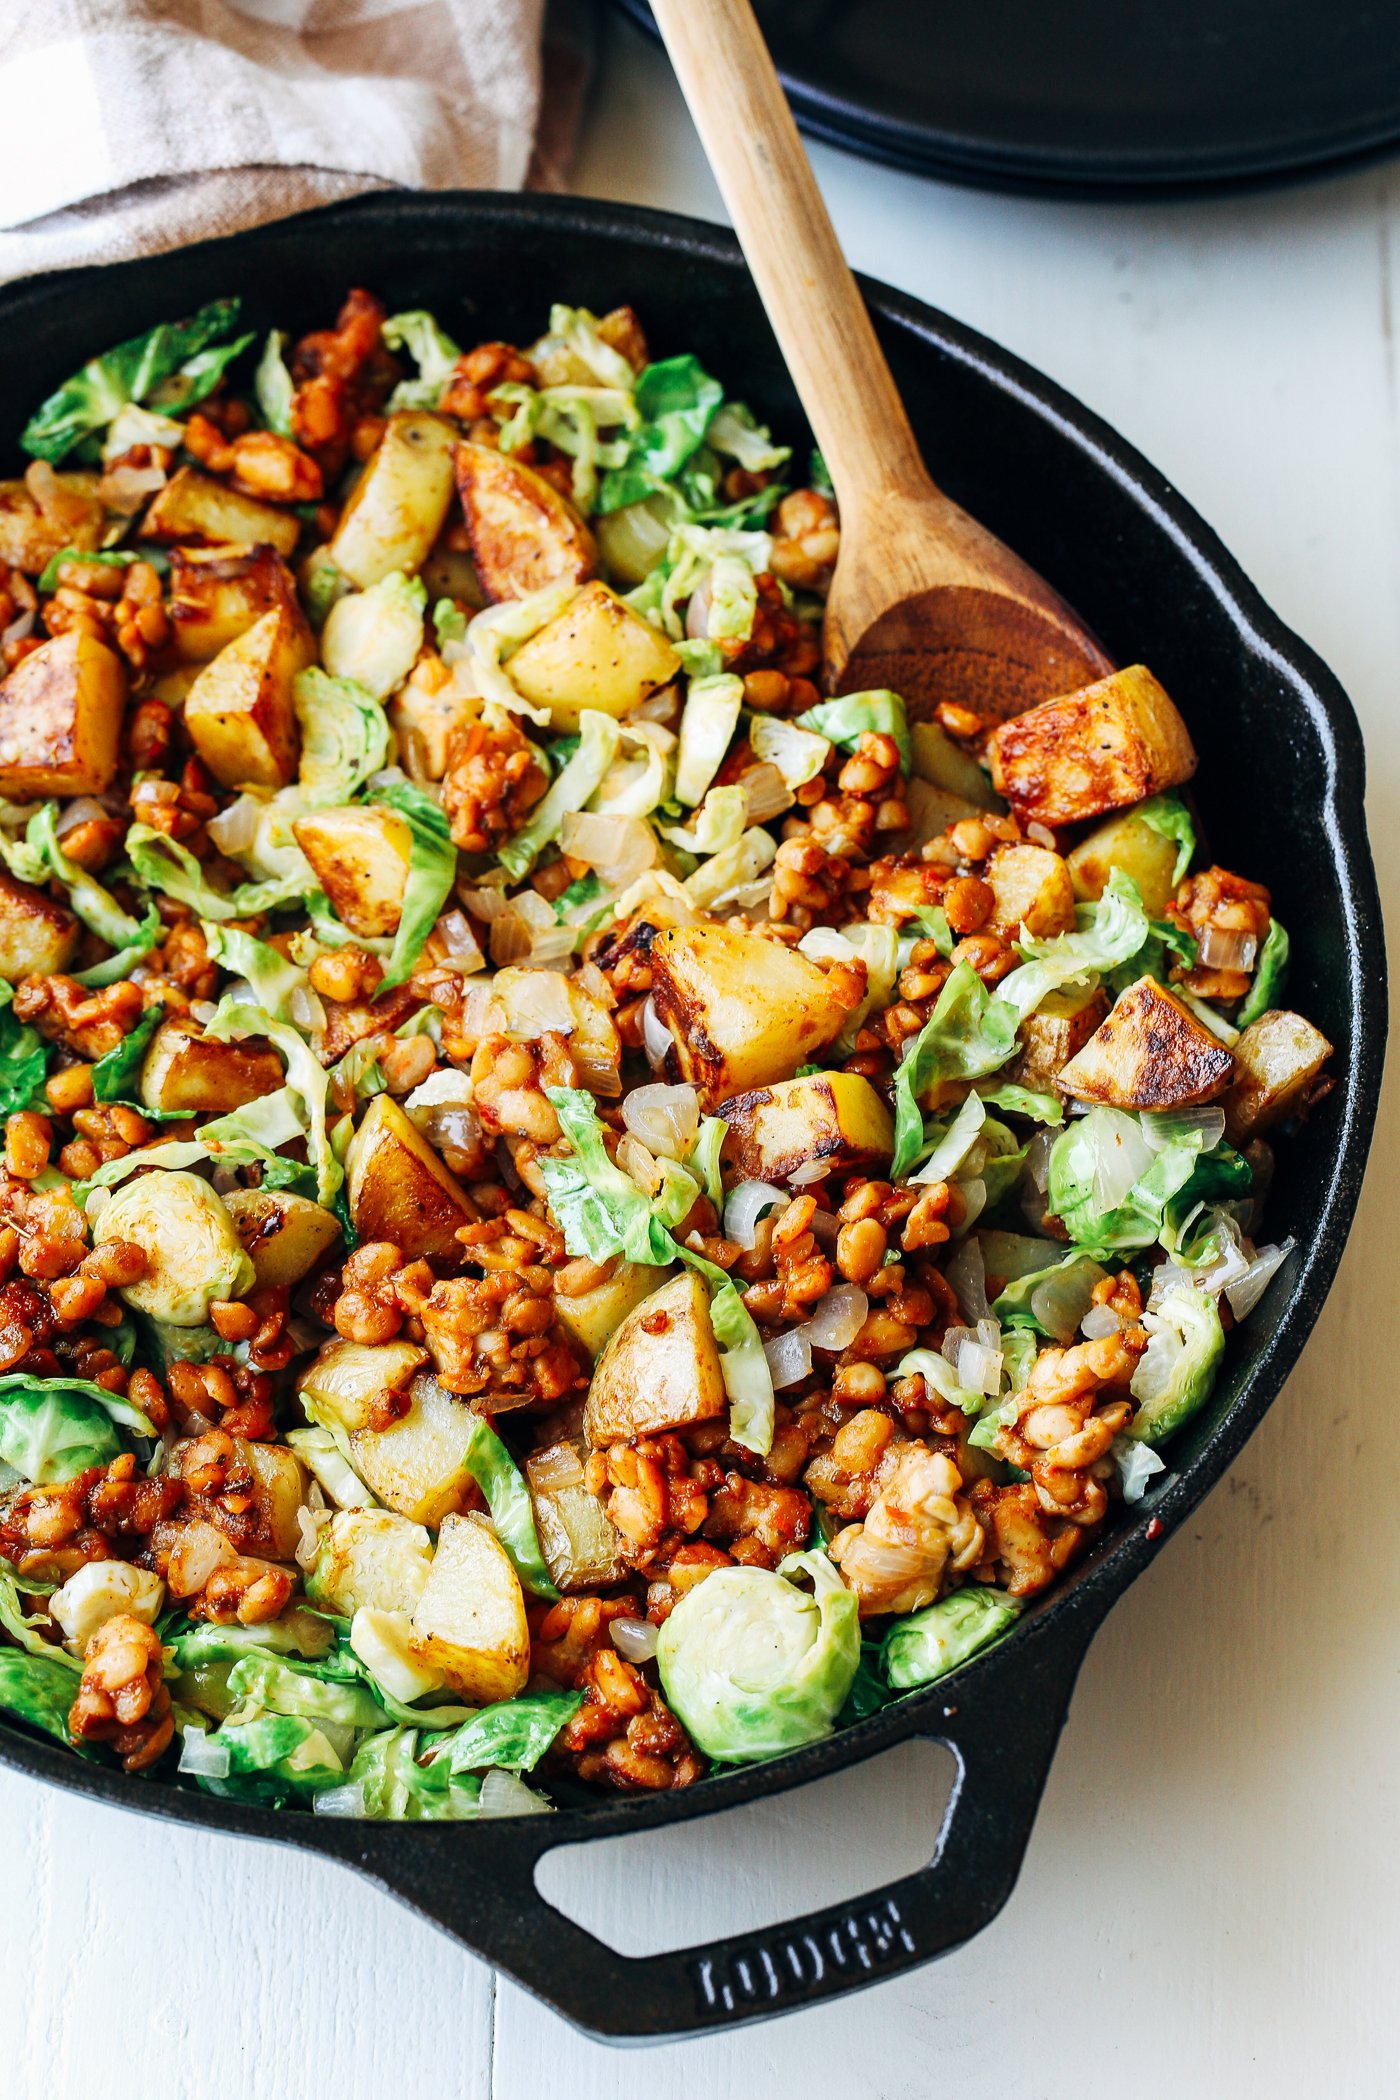 Smokey Maple Tempeh Hash with Brussel Sprouts